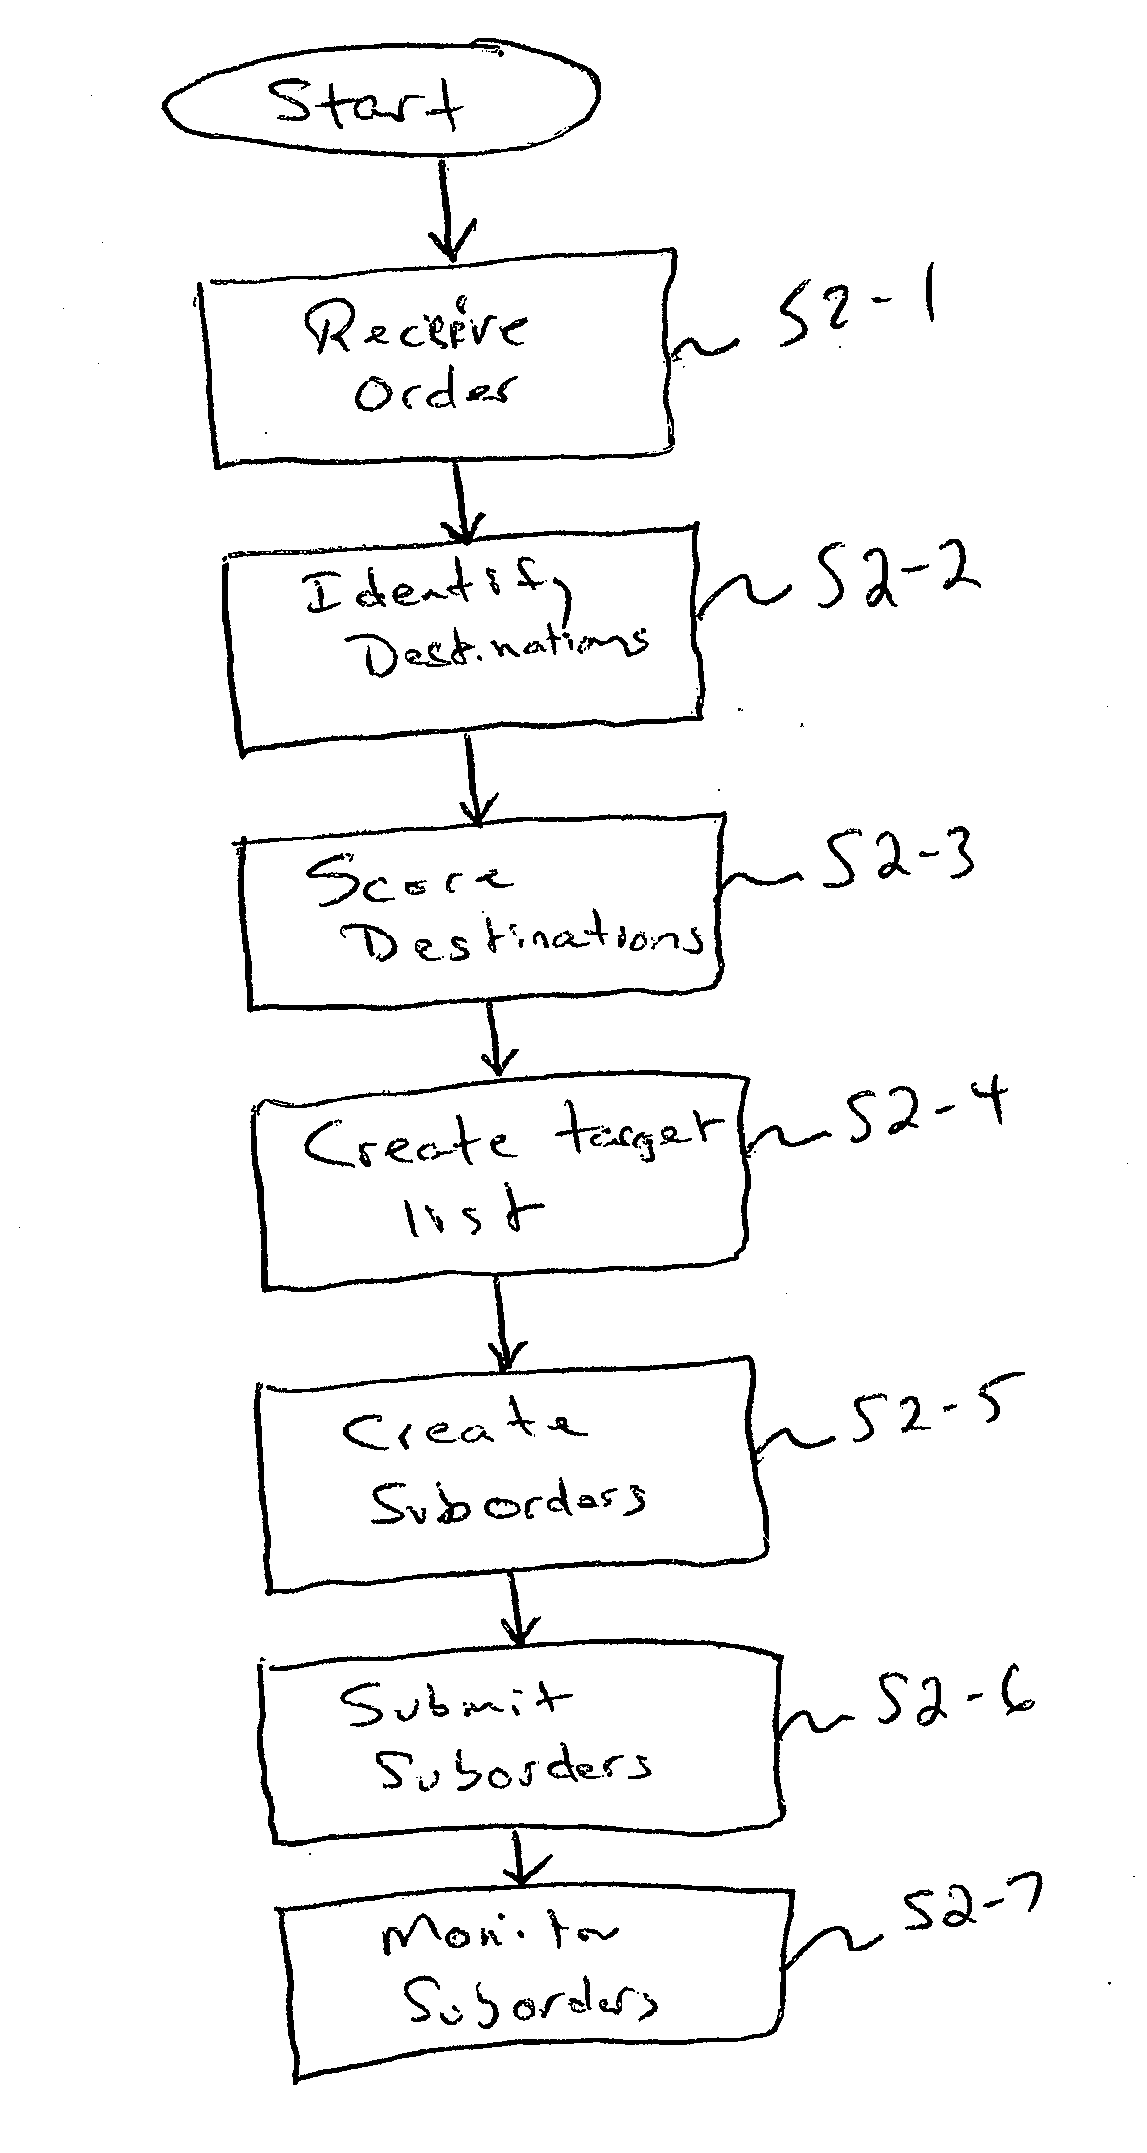 System and method for allocating electronic trade orders among a plurality of electronic trade venues